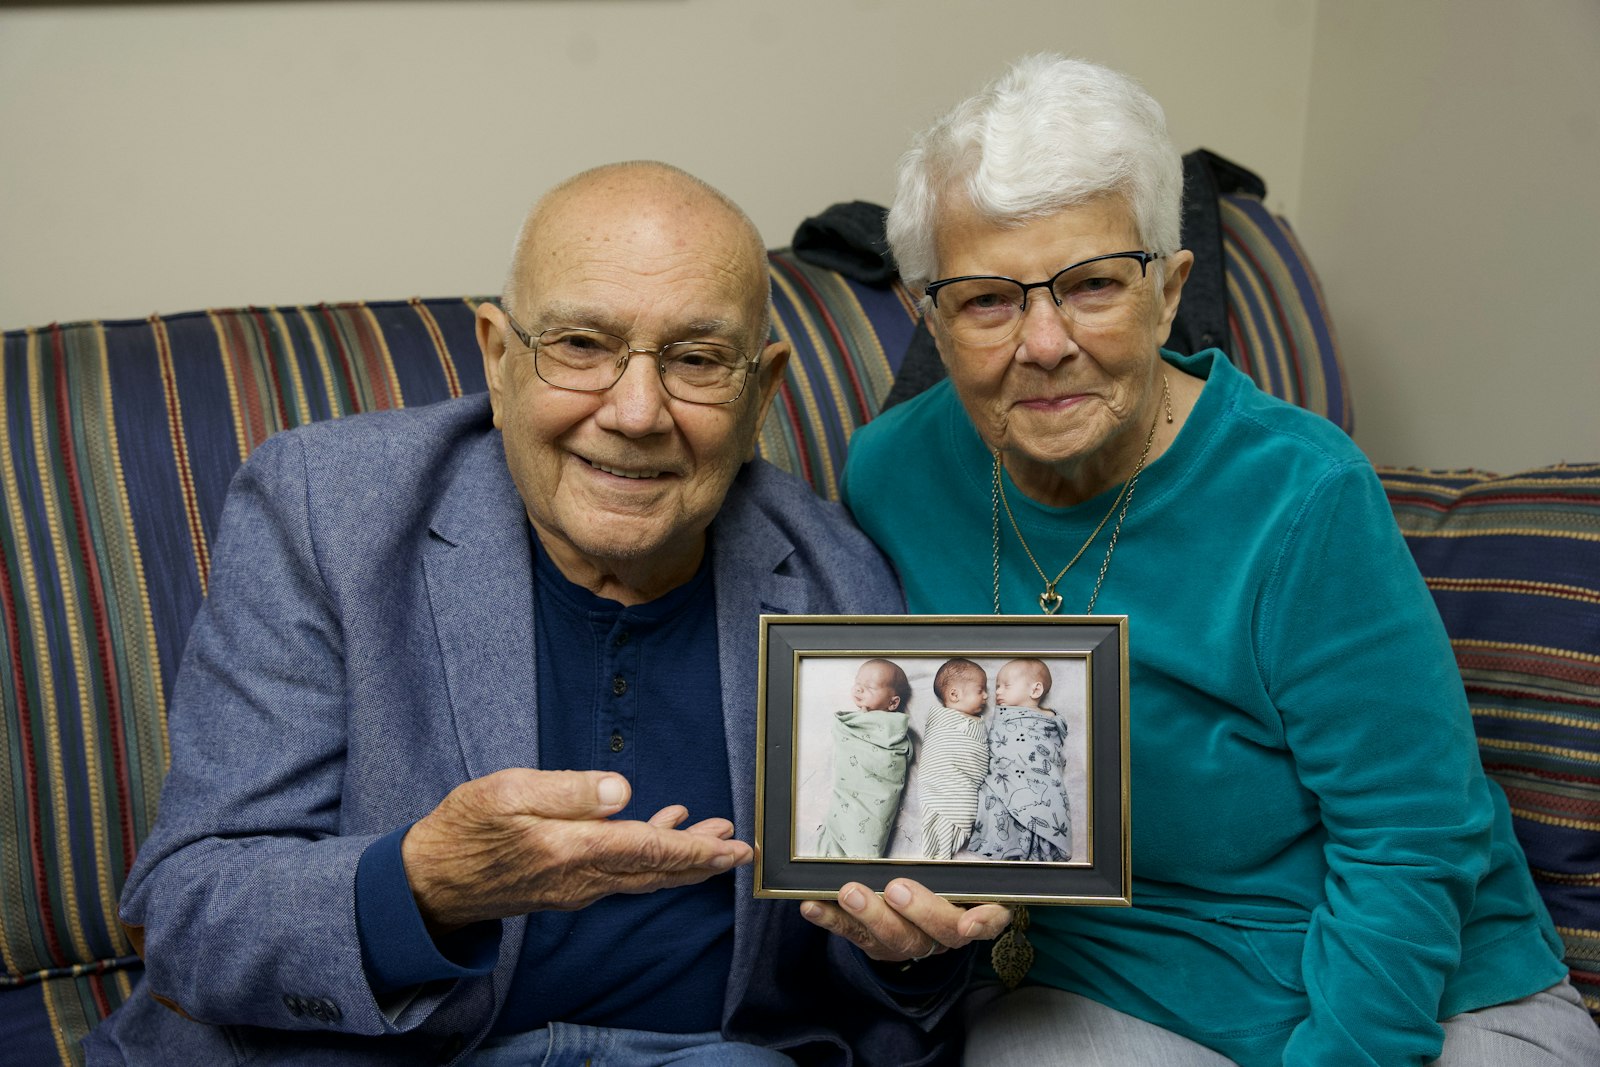 Deacon Robert and Carol Delbeke, who have been married since they were 20 and 19, respectively, don’t quit even now as grandparents and, more recently, great-grandparents to triplets.